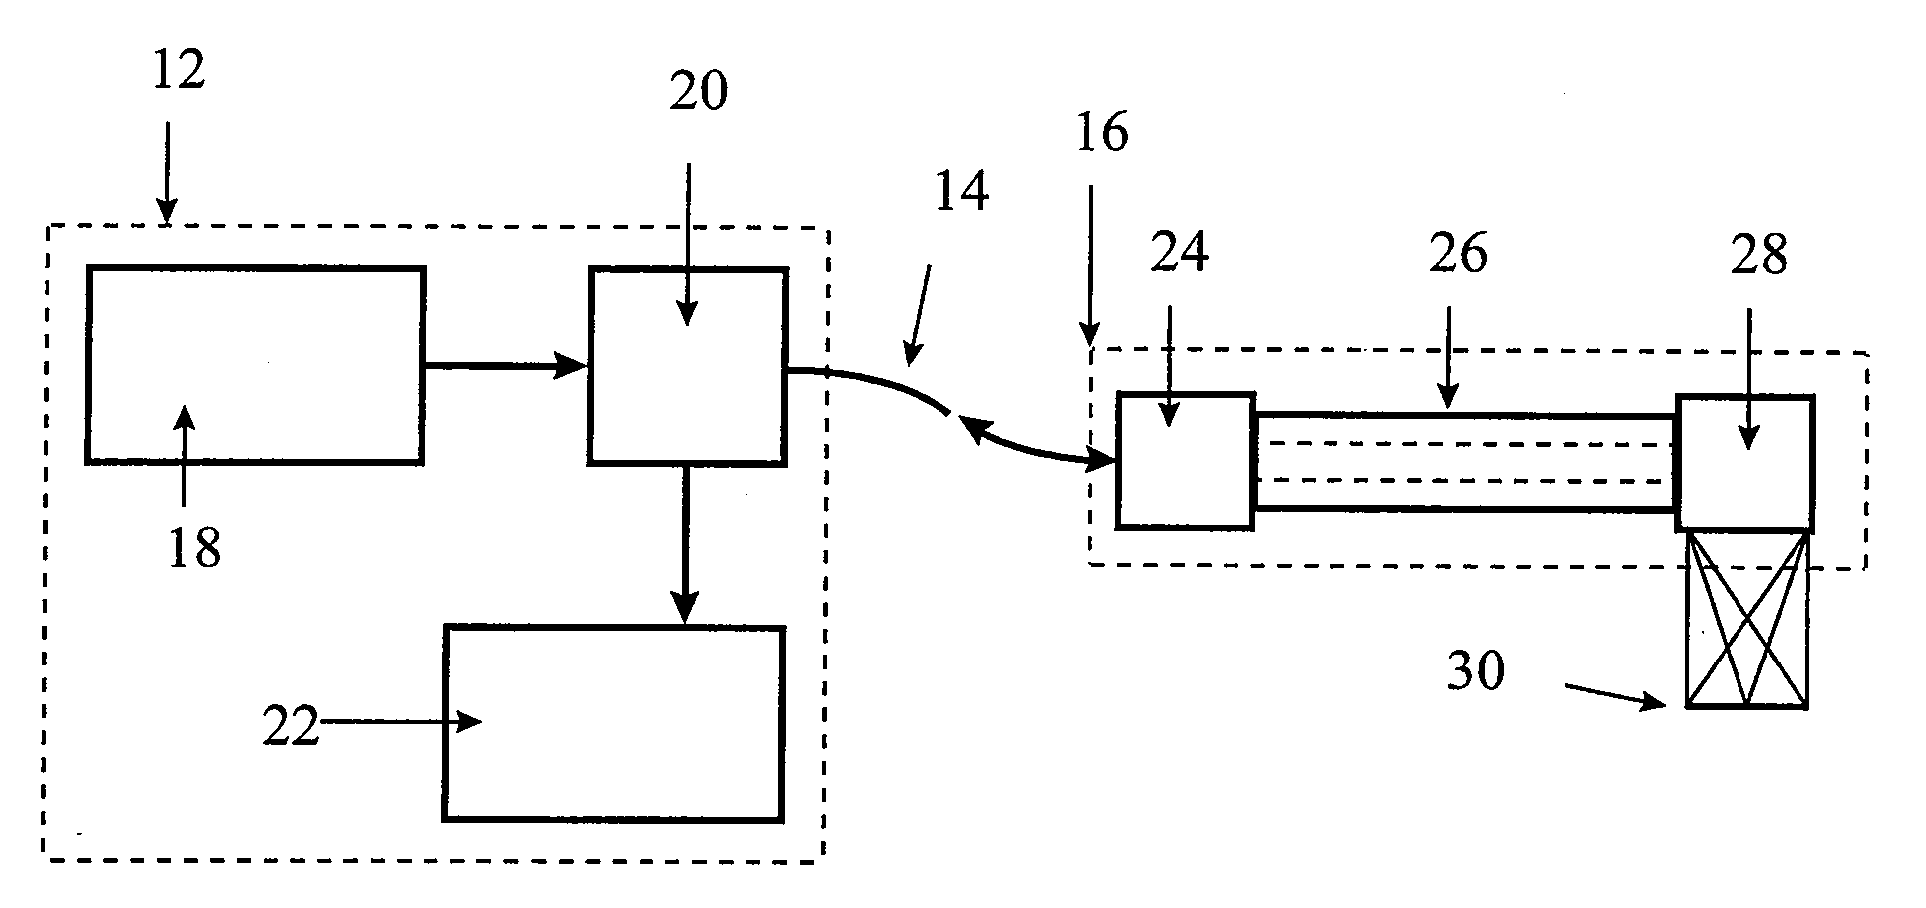 Apparatus and method for providing information for at least one structure